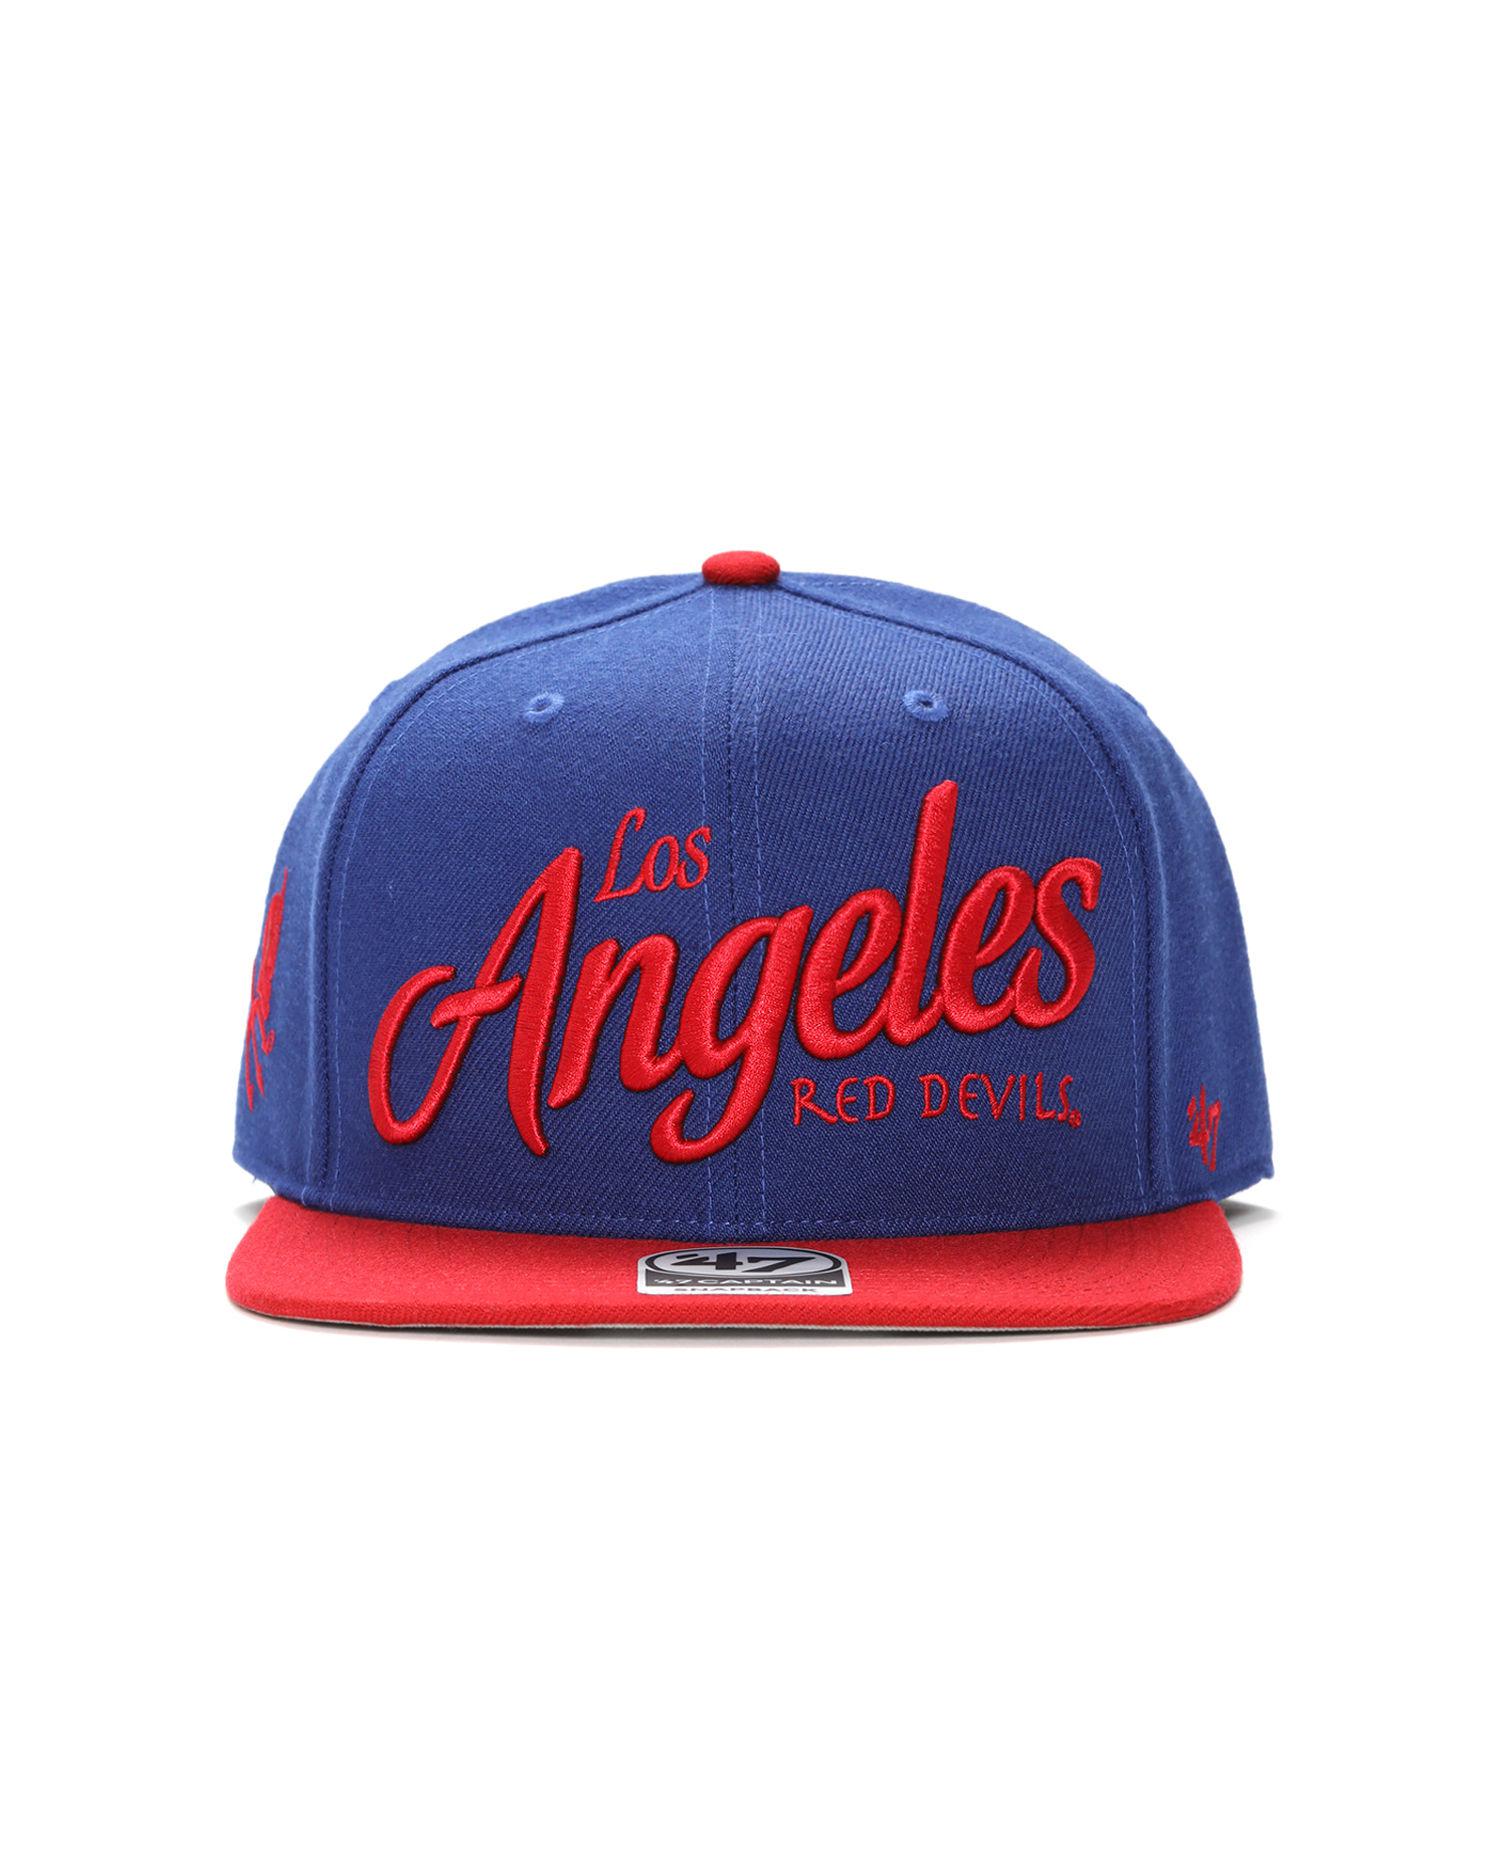 Los Angeles Red Devils snapback by '47